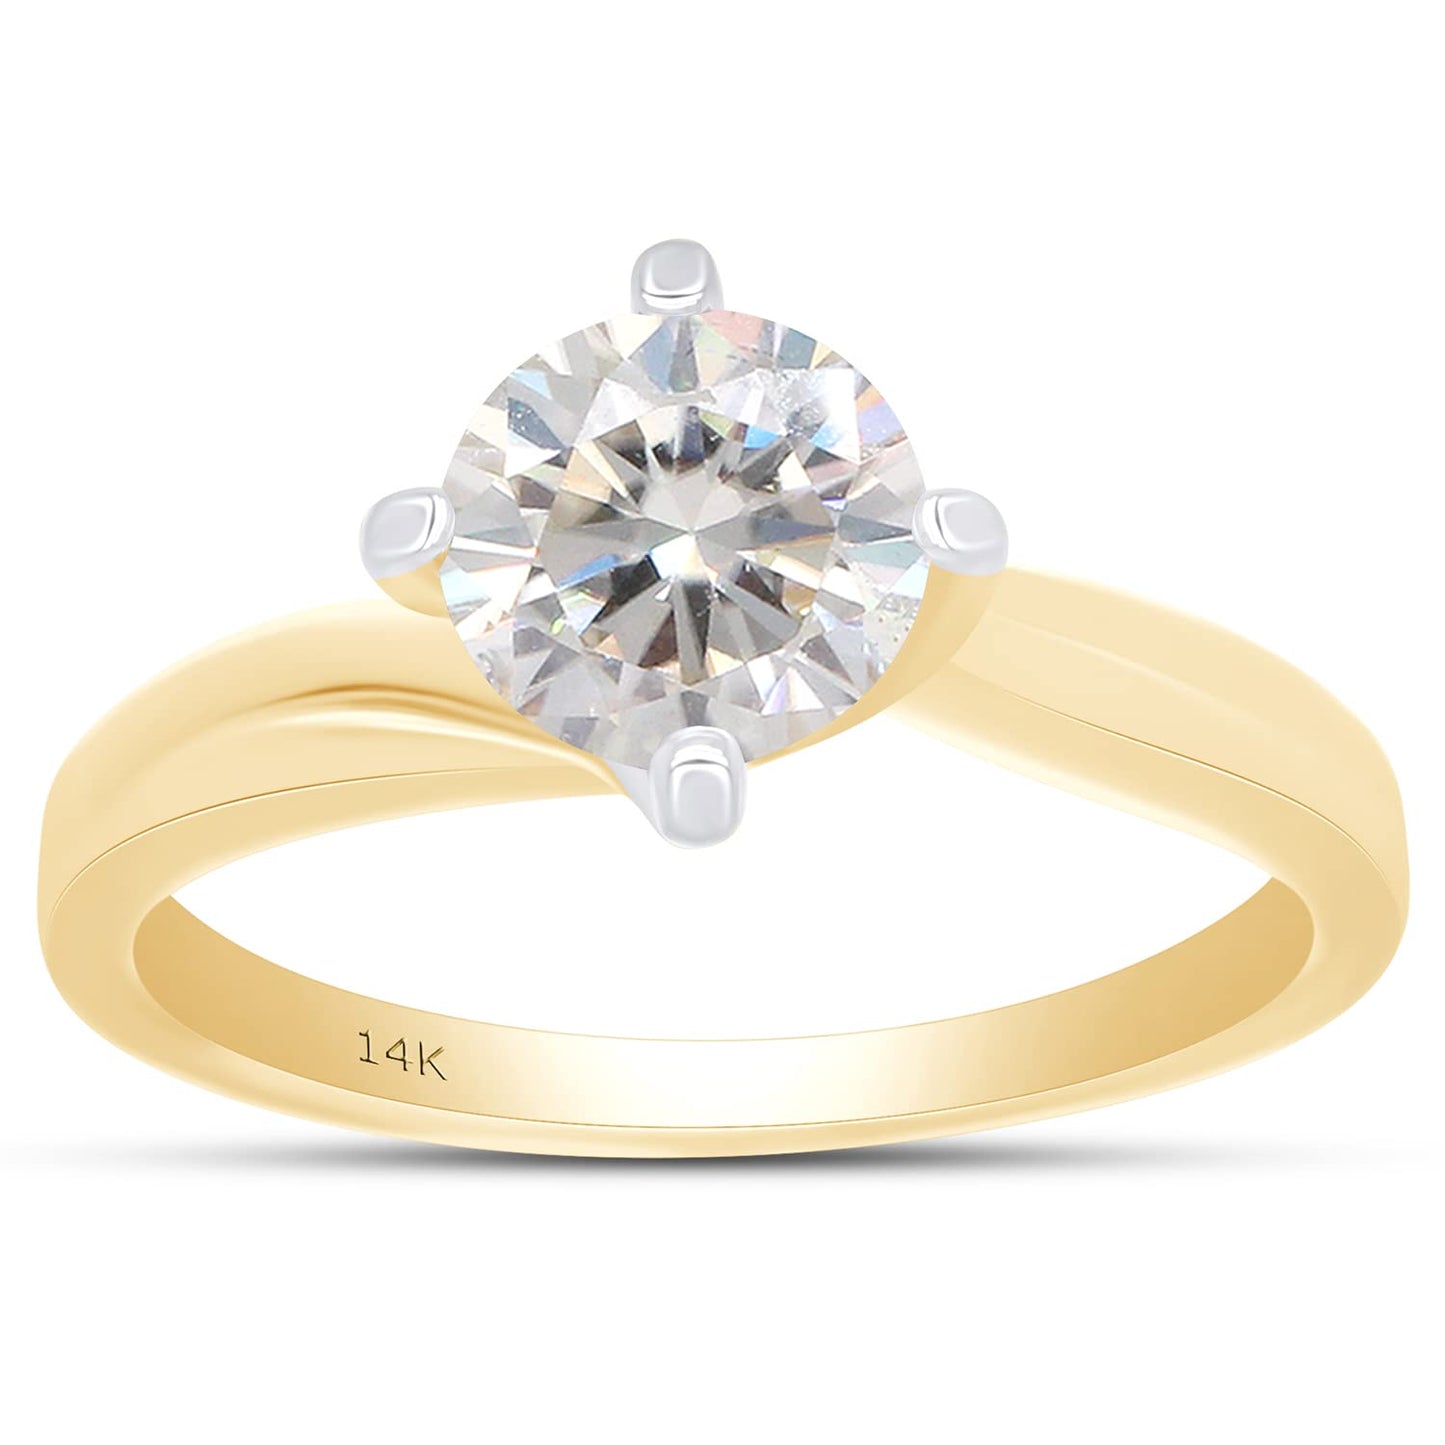 1.00 Carat Round Cut Lab Created Moissanite Diamond Solitaire Engagement Ring in 10K or 14K Solid Gold